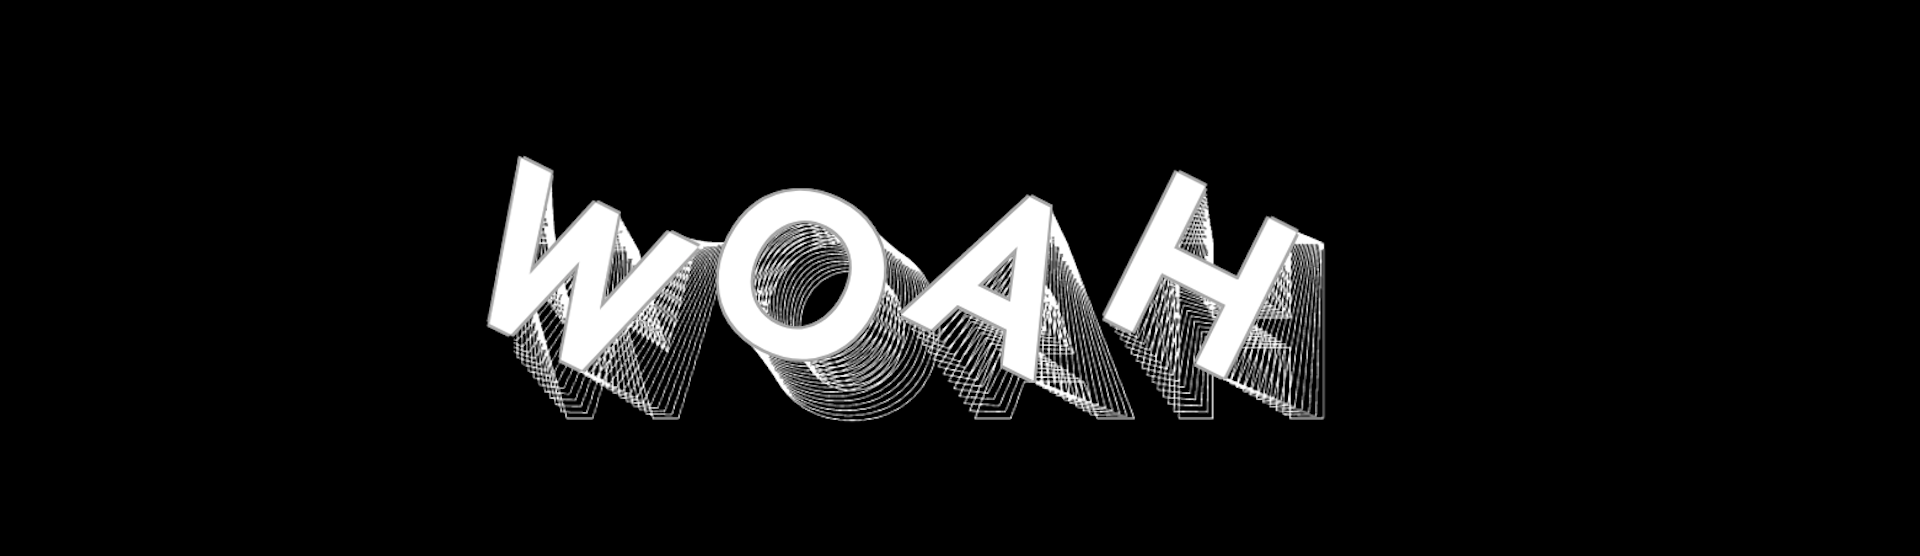 Black and white demo of woah font